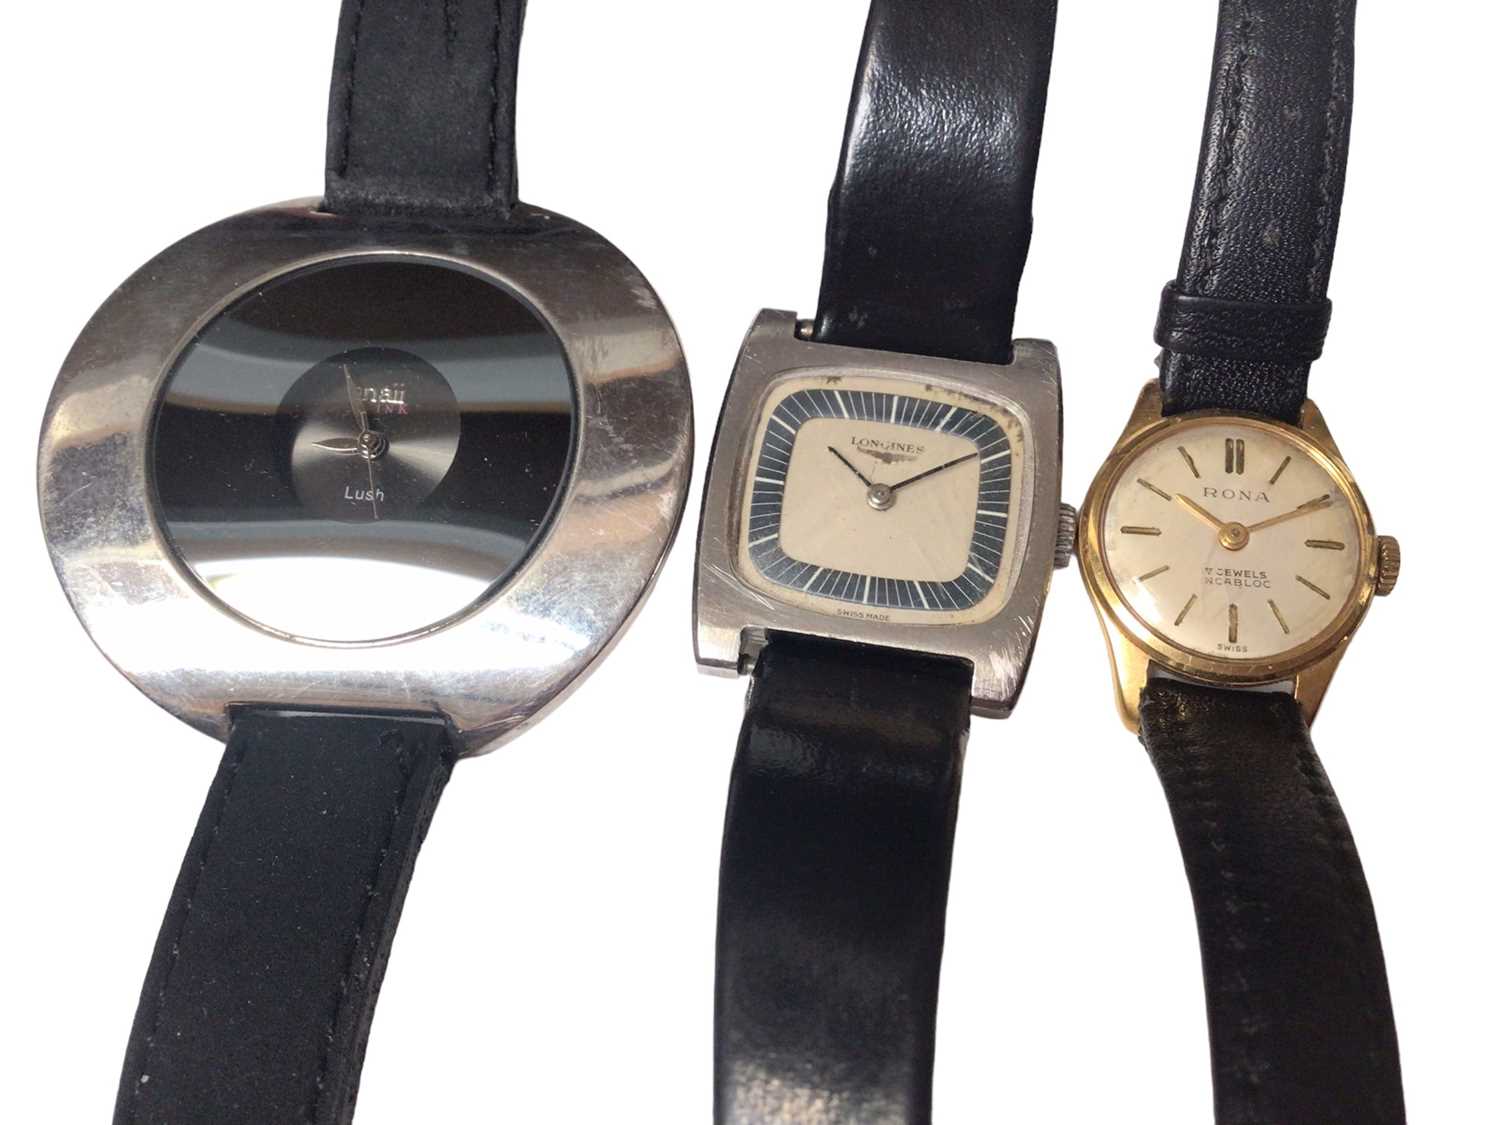 18ct gold cased ladies Tissot watch, 1970s Longines wristwatch, two other wristwatches, gold plated - Image 2 of 4